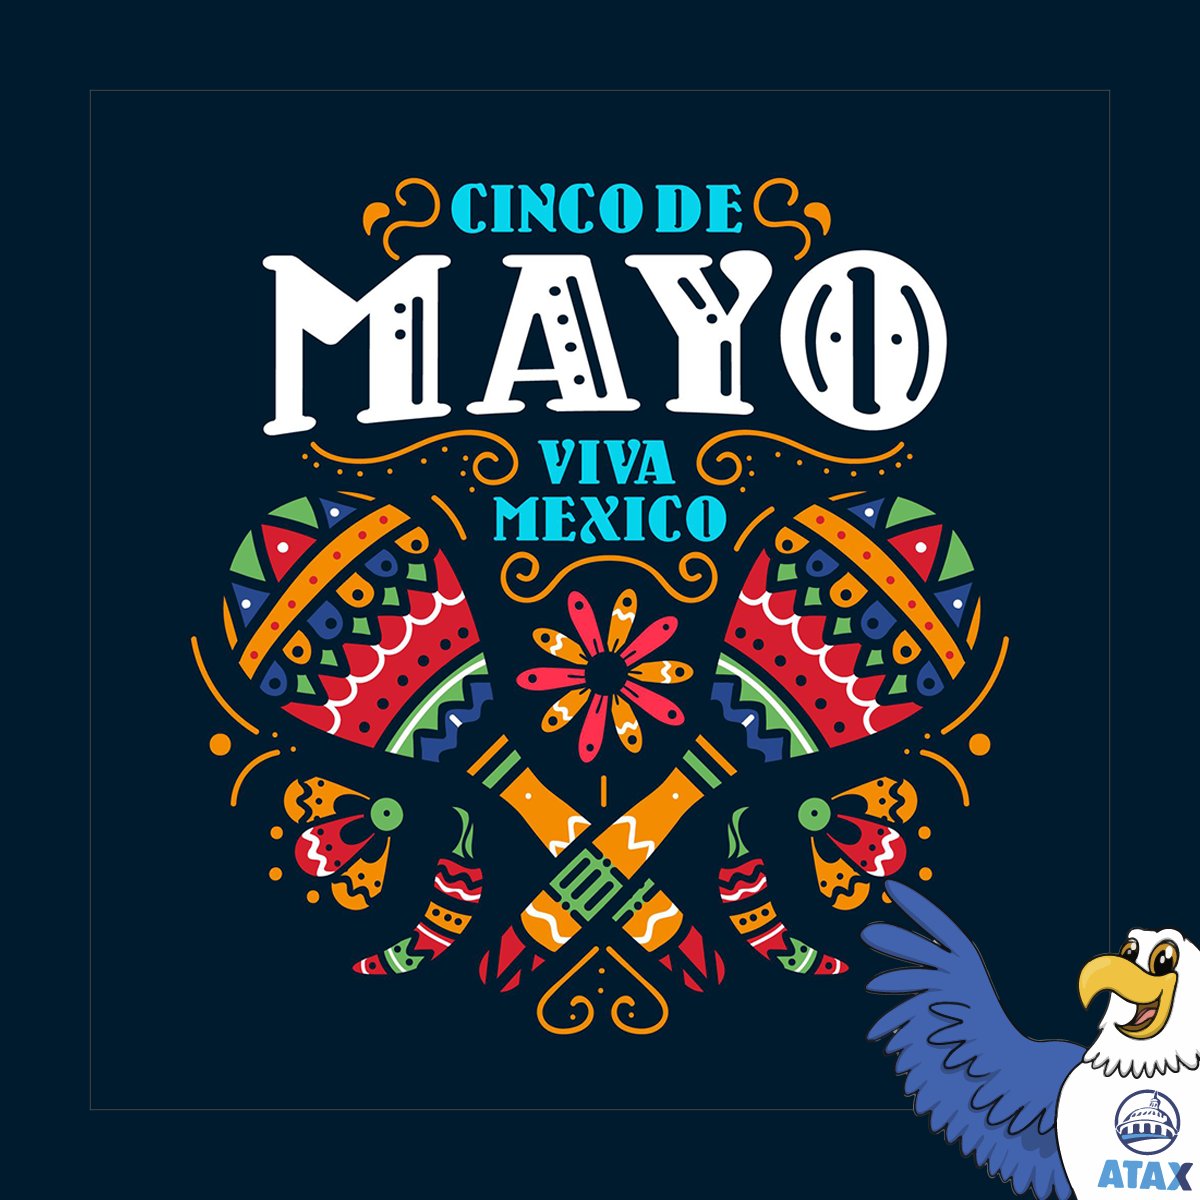 🎉🇲🇽 Happy Cinco De Mayo from all of us at ATAX! 🌮🎊 Today, we celebrate the rich culture, heritage, and resilience of the Mexican community. Let's come together to enjoy delicious food, vibrant music, and colorful festivities.